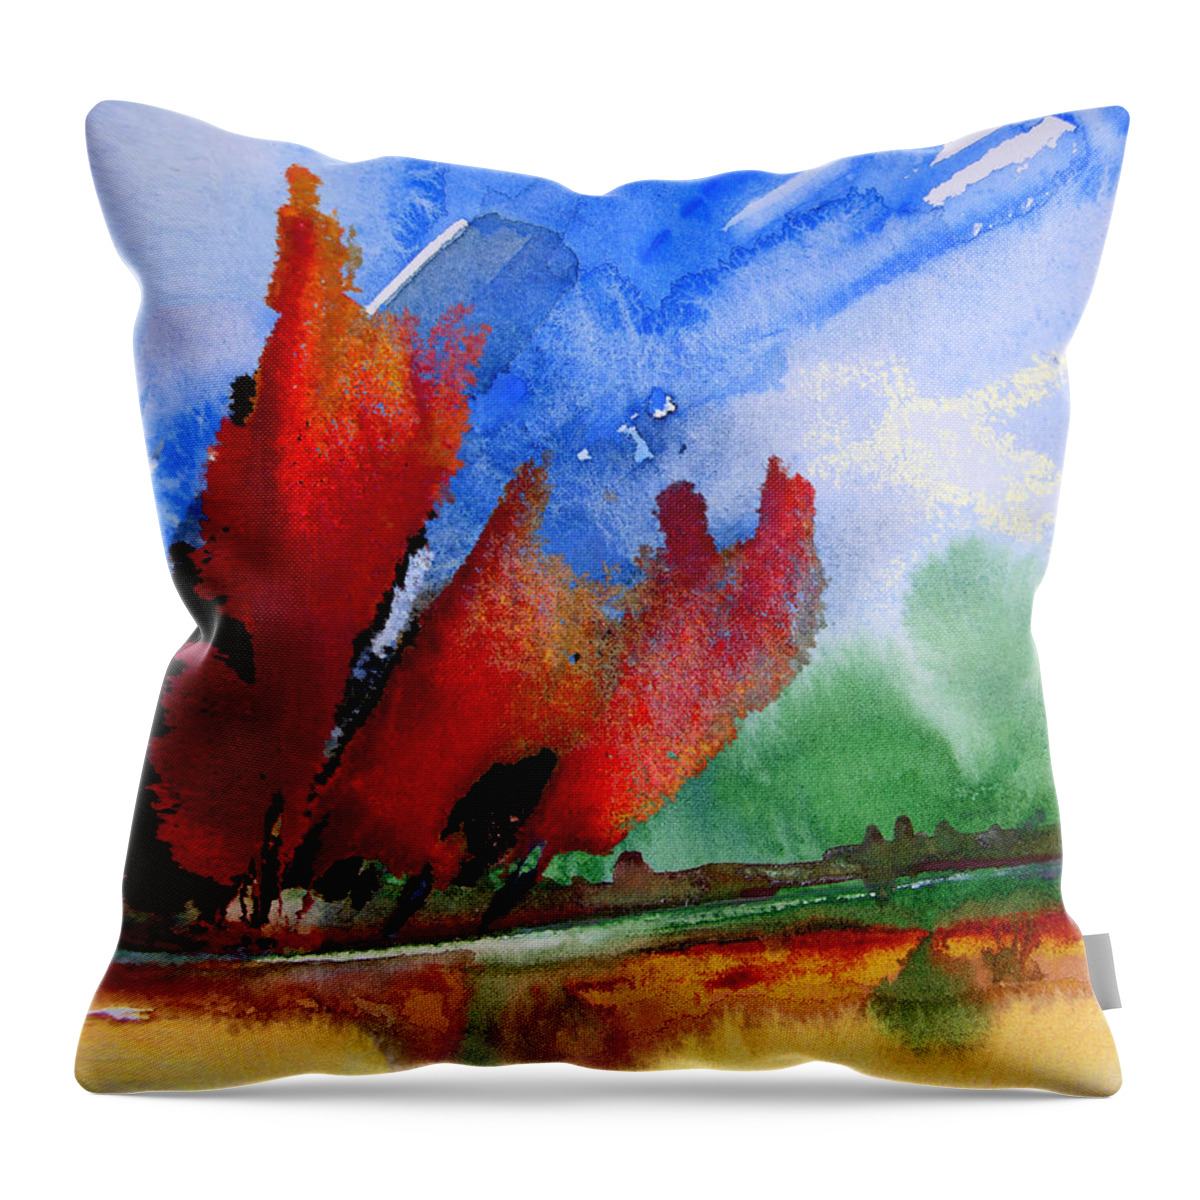 Watercolour Throw Pillow featuring the painting Dawn 04 by Miki De Goodaboom